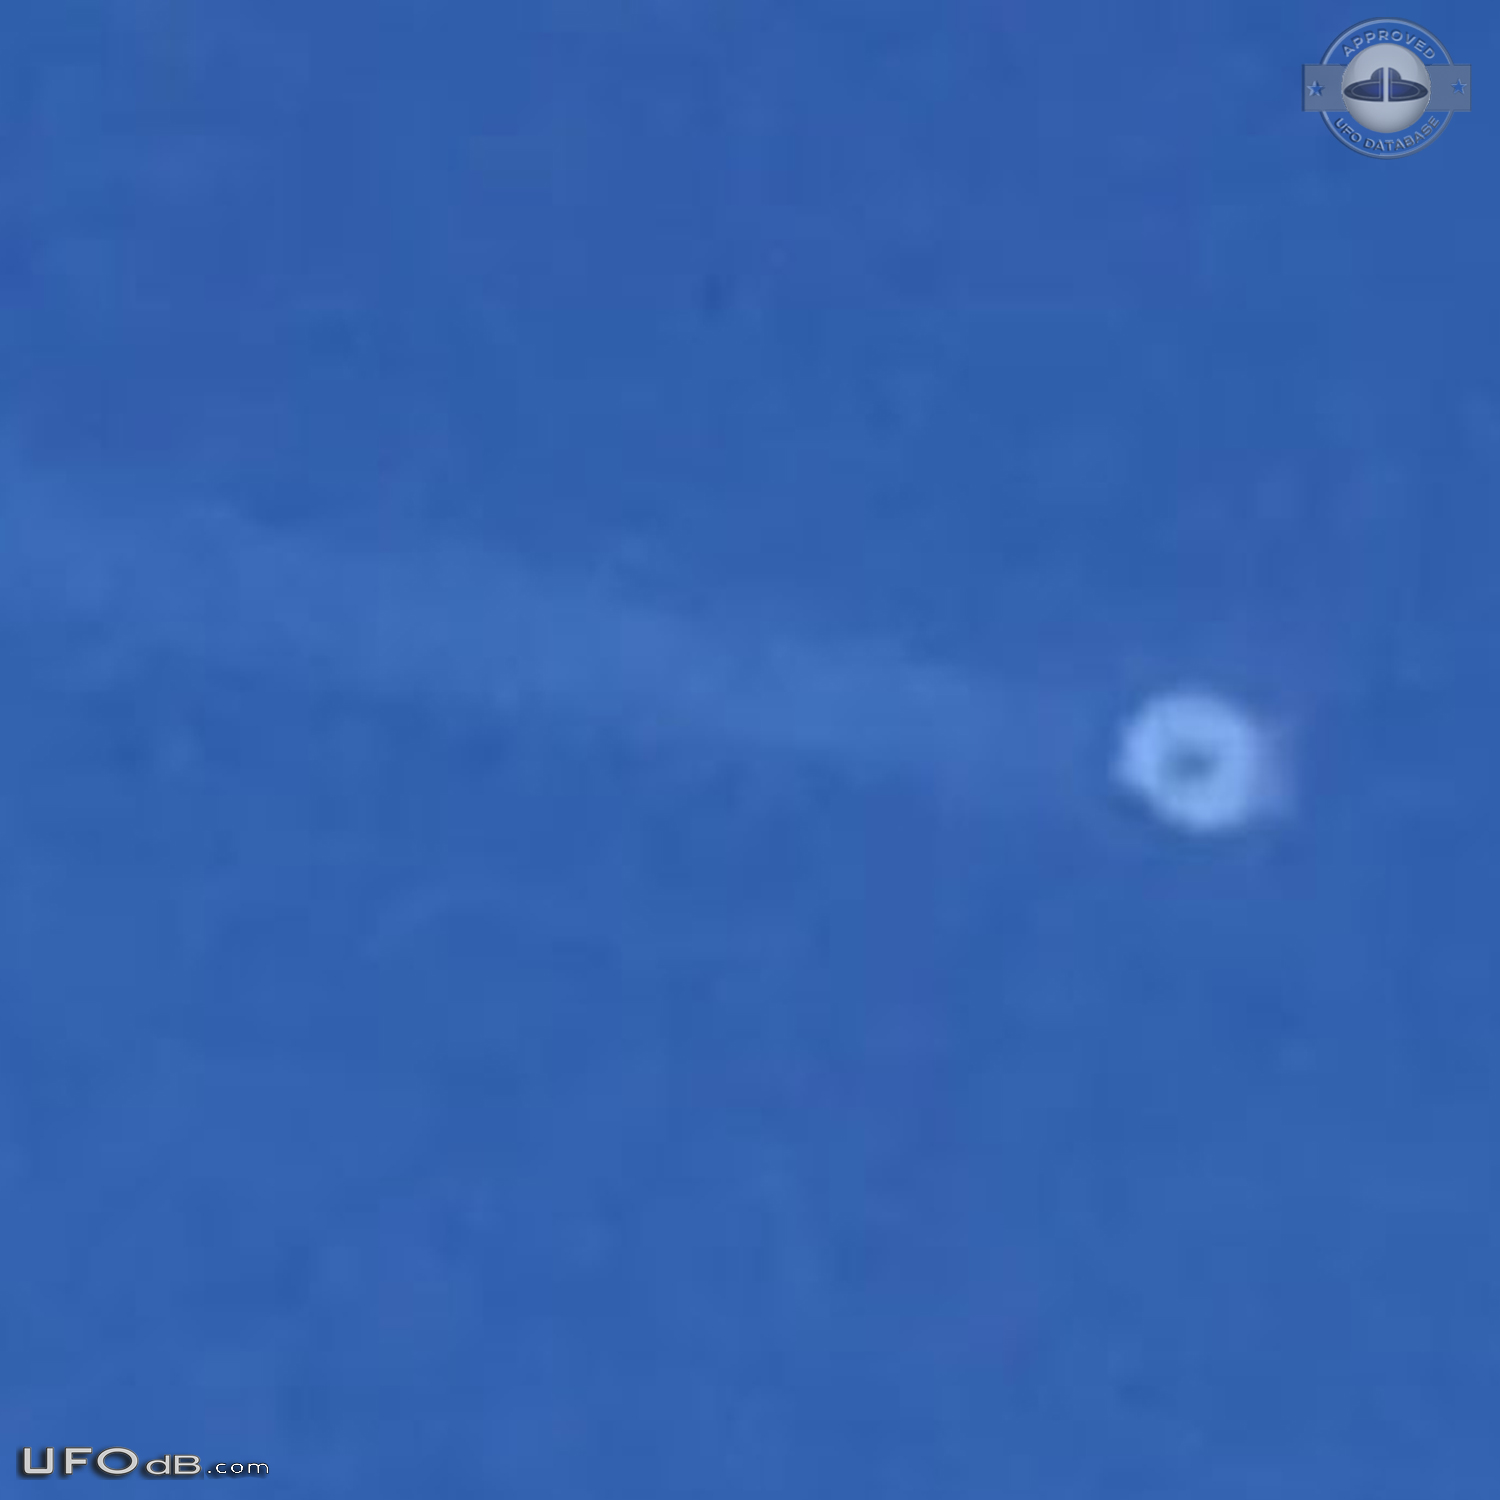 Two separate UFOs. zigzagging then taking off in opposite directions T UFO Picture #779-4